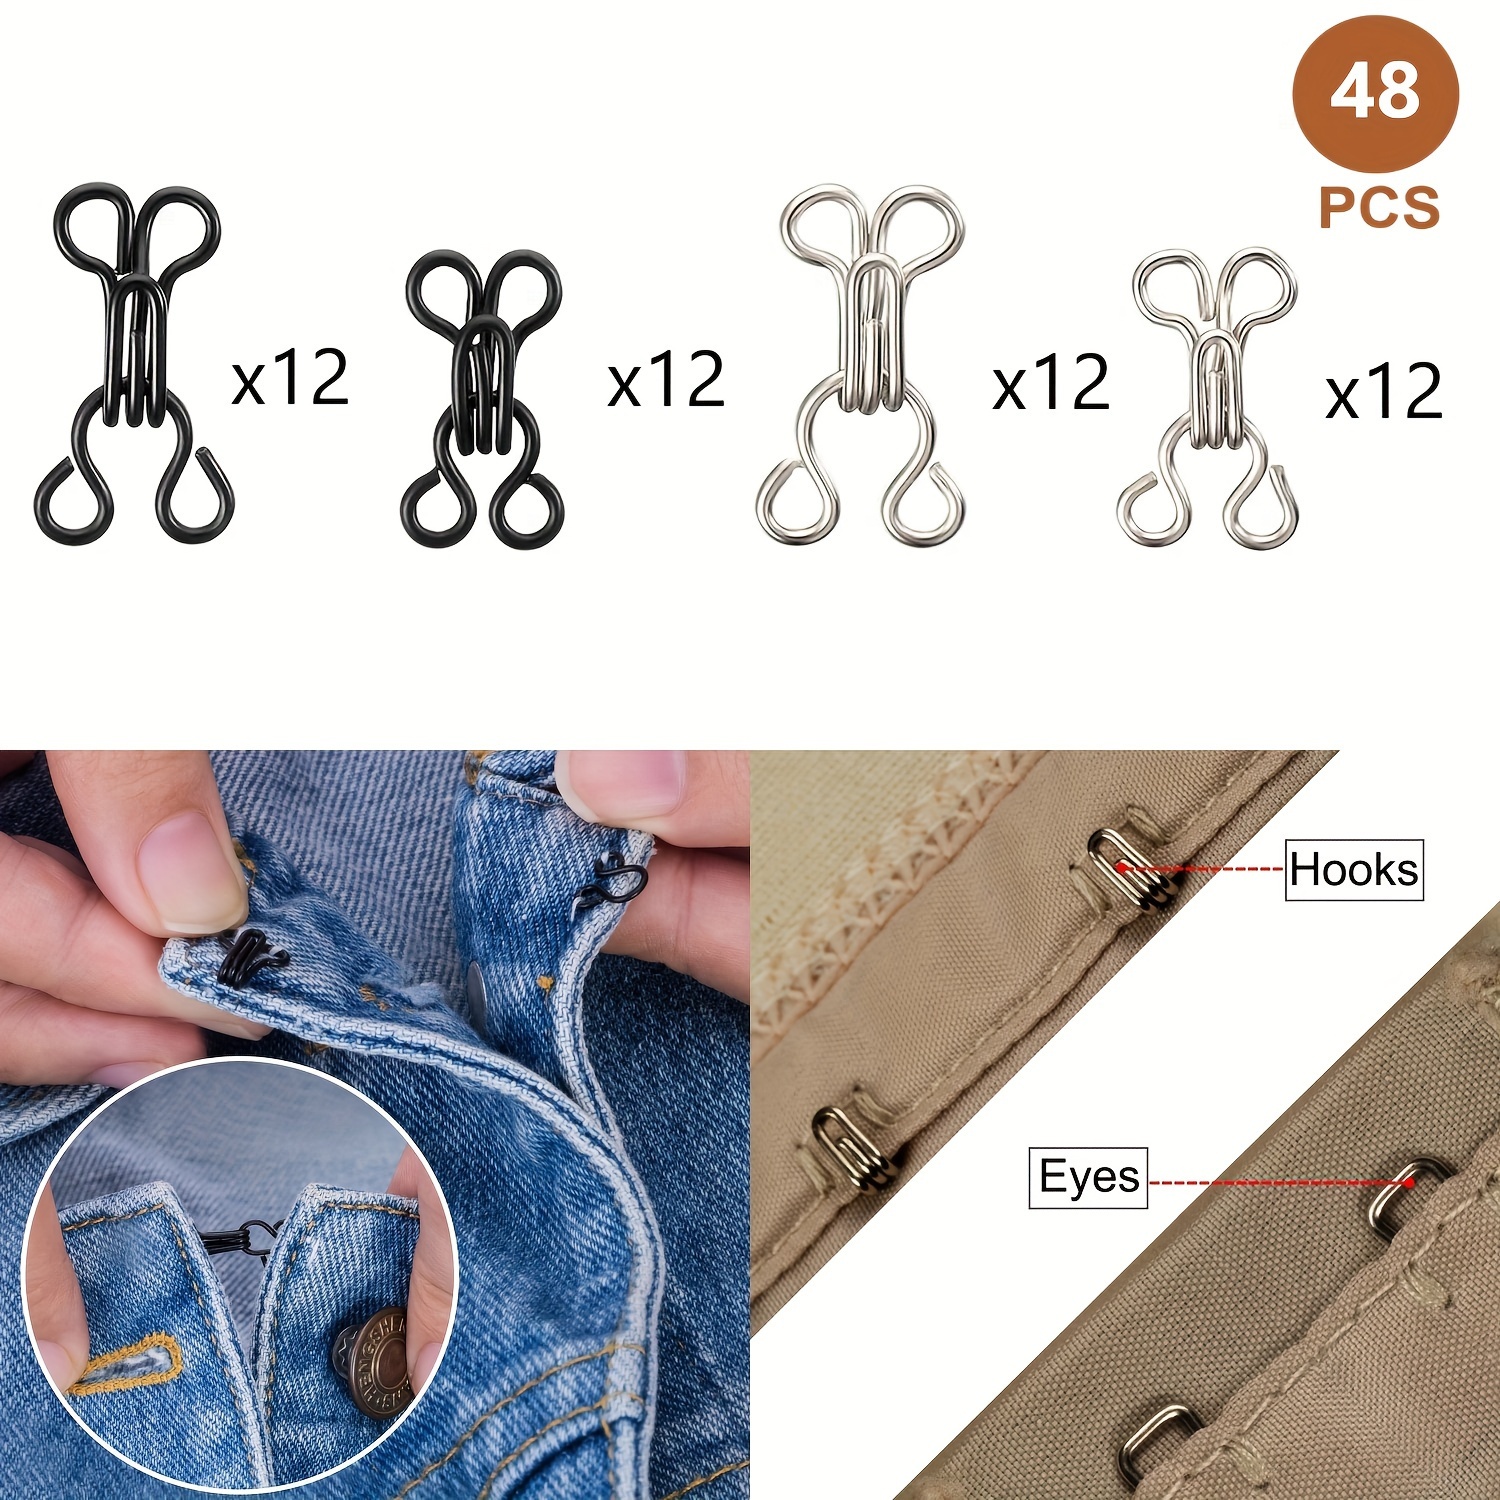 24pcs Pack Buckle With Hook Metal Small Collar Hook Underwear Hook Buckle  Skirt Sweater Hook Buckle Clothes Anti Exposure Buckle, Shop The Latest  Trends